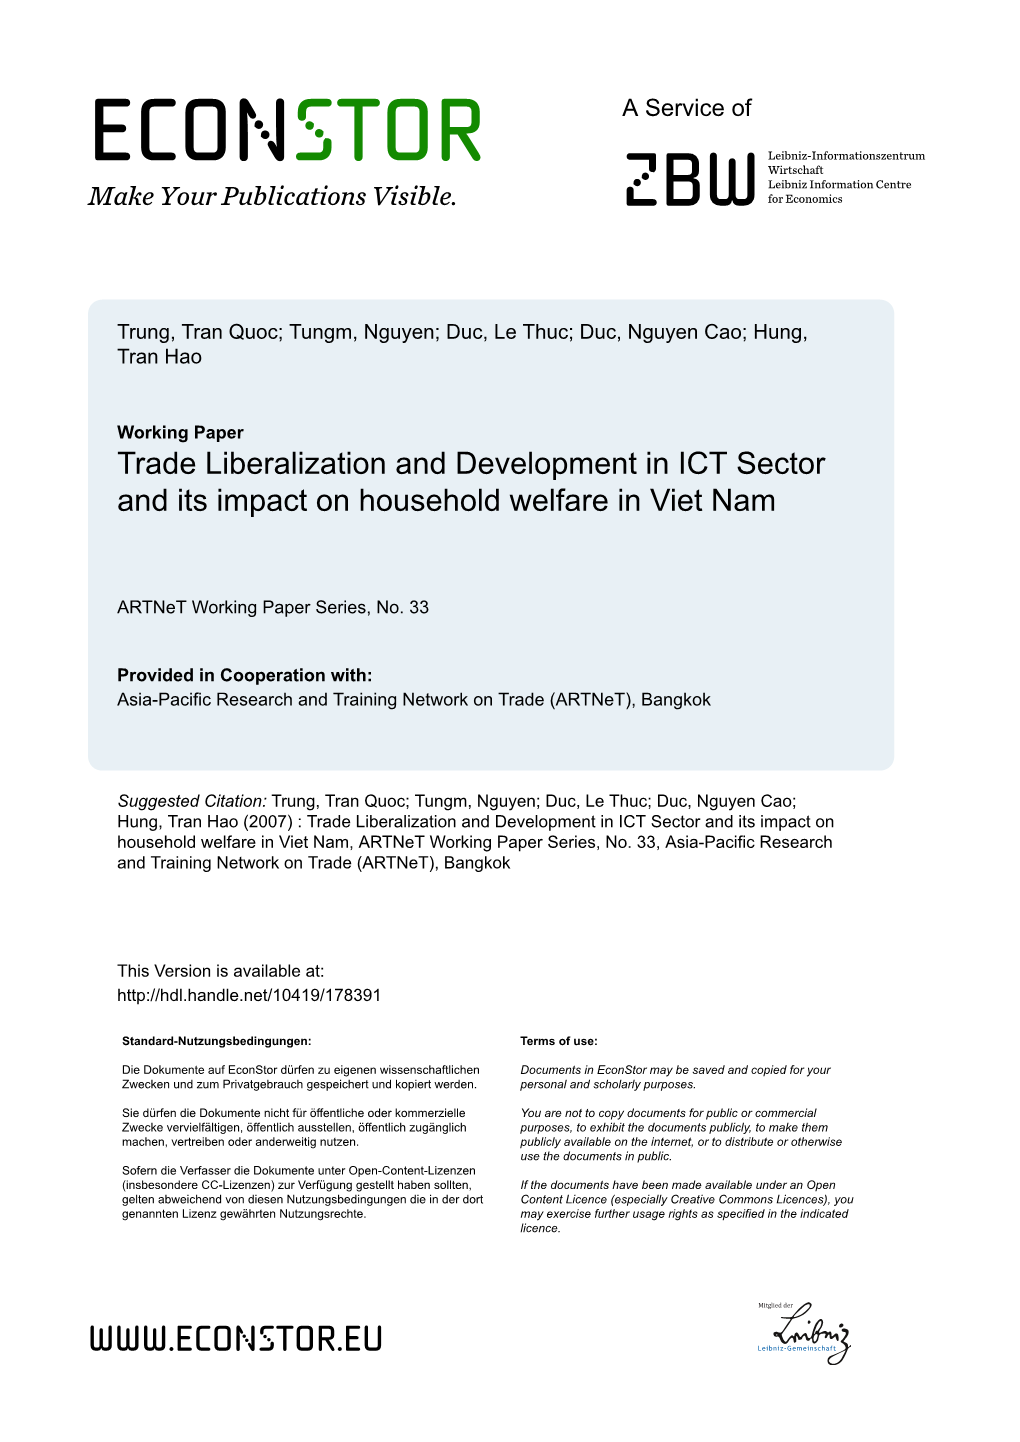 Trade Liberalization and Development in ICT Sector and Its Impact on Household Welfare in Viet Nam